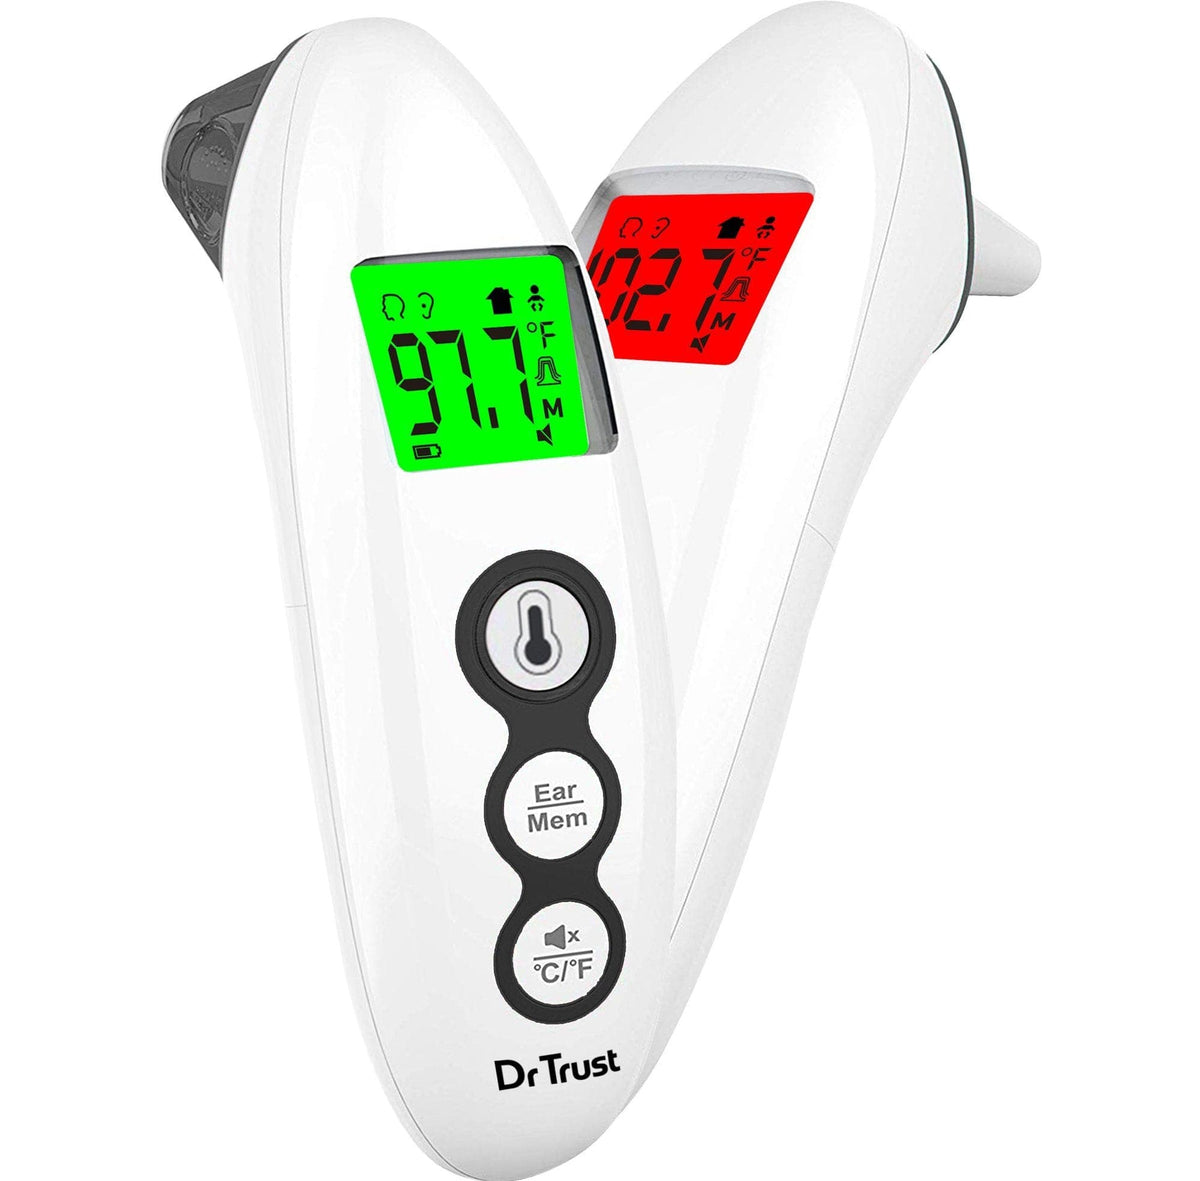 Digital infrared thermometer forehead and ear